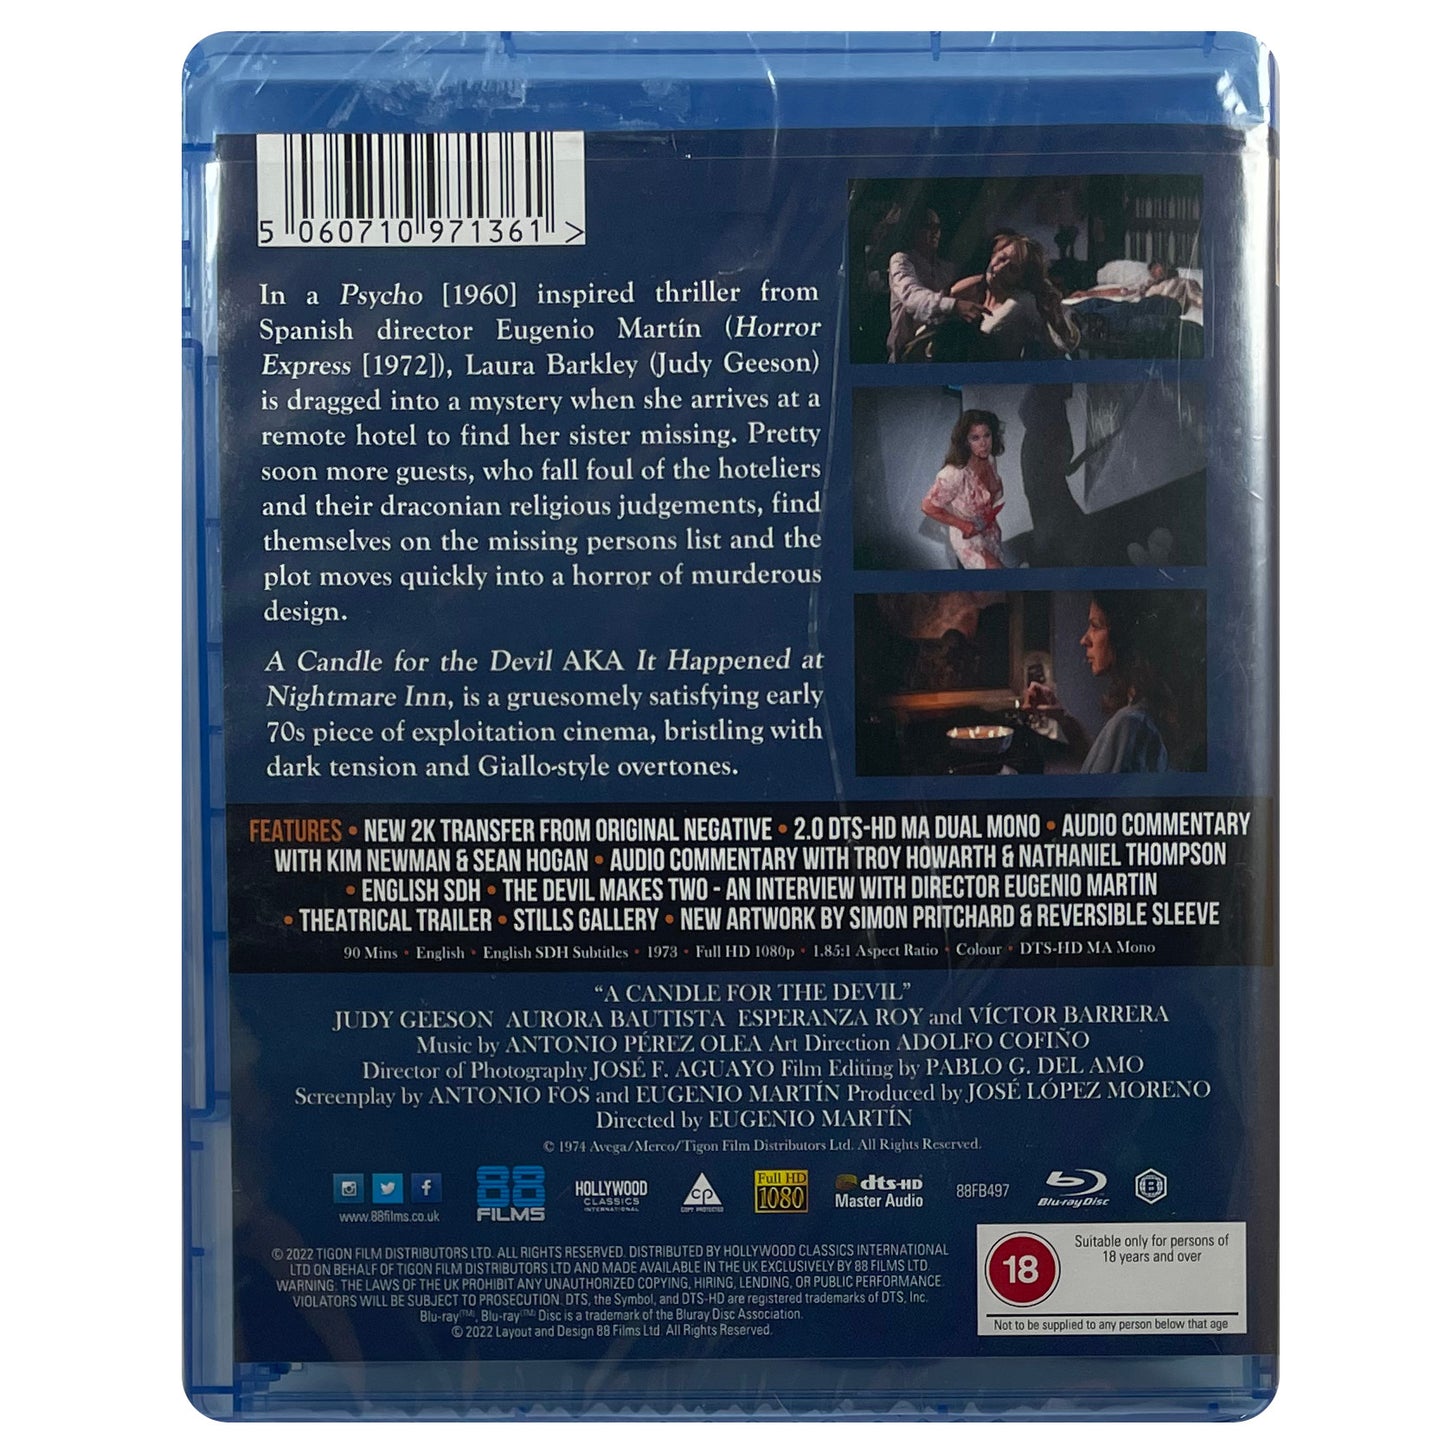 A Candle for the Devil Blu-Ray **Slightly Bent and Damaged Case**